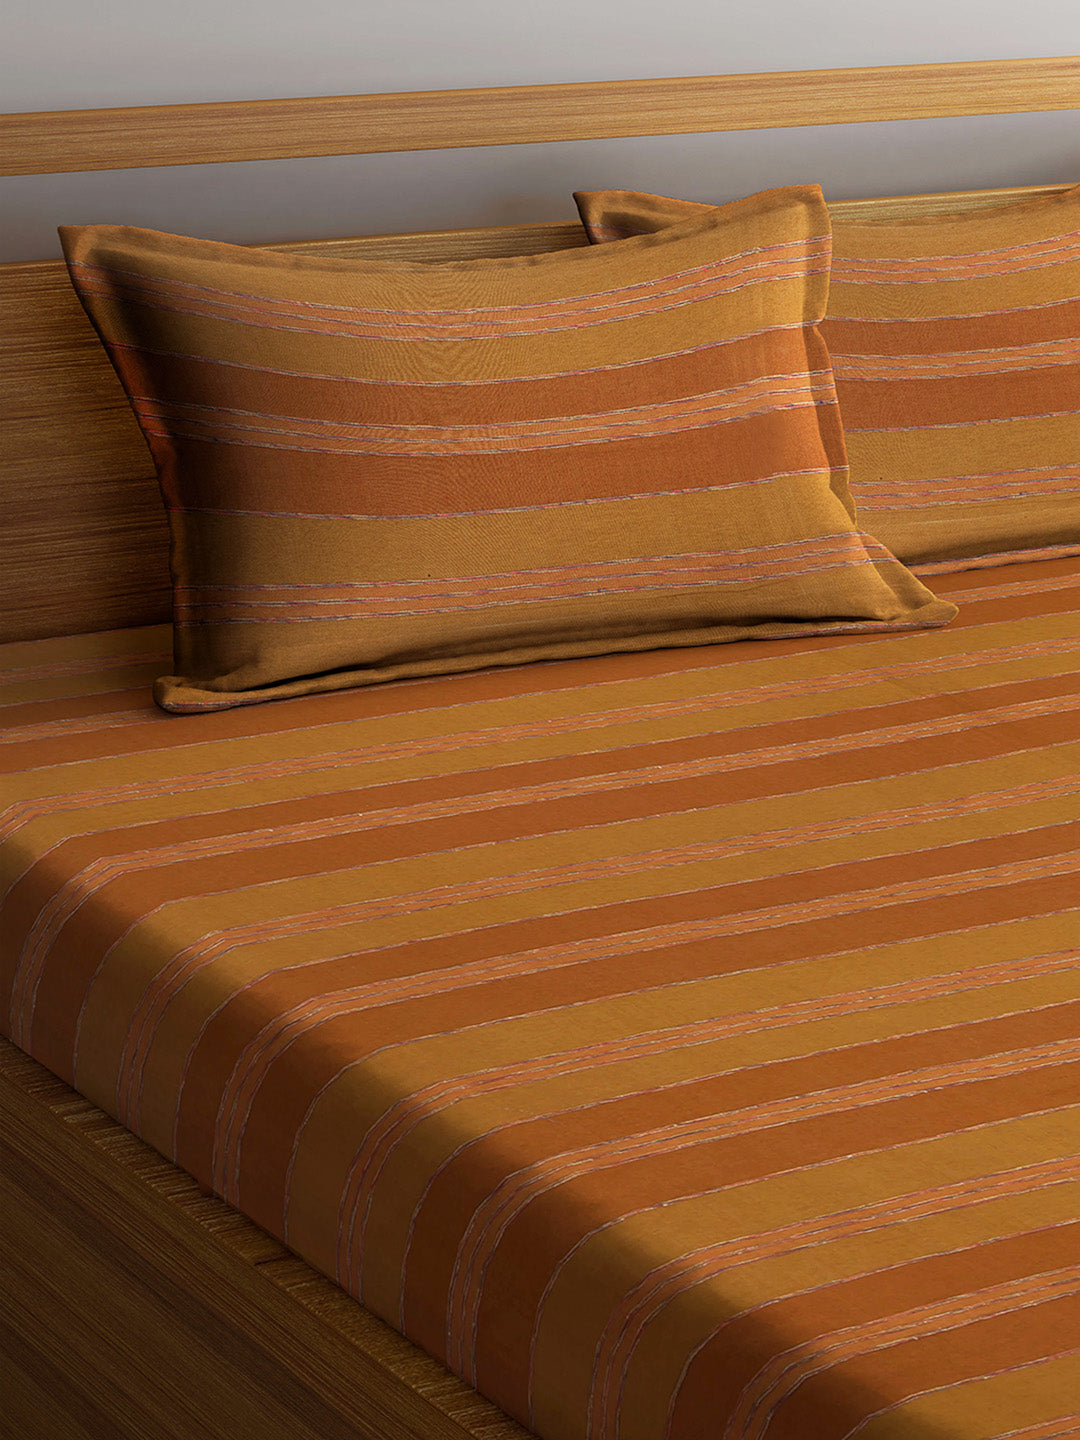 Arrabi Brown Stripes Handwoven Cotton Double King Size Bedsheet with 2 Pillow Covers (270 x 270 cm)